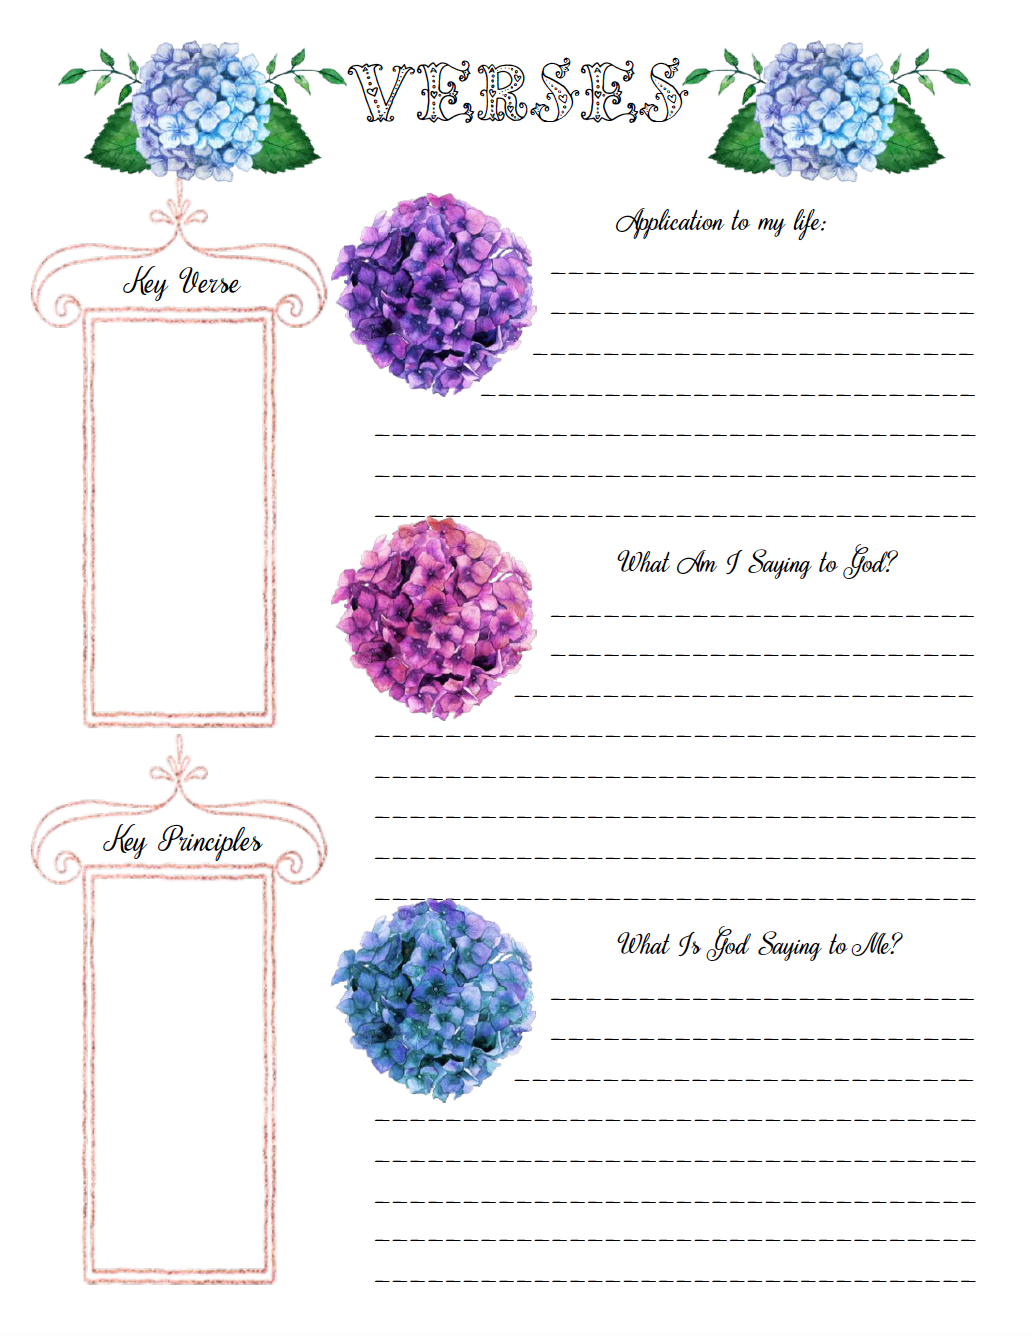 Free Bible Journaling Printables (Including One You Can Color!)